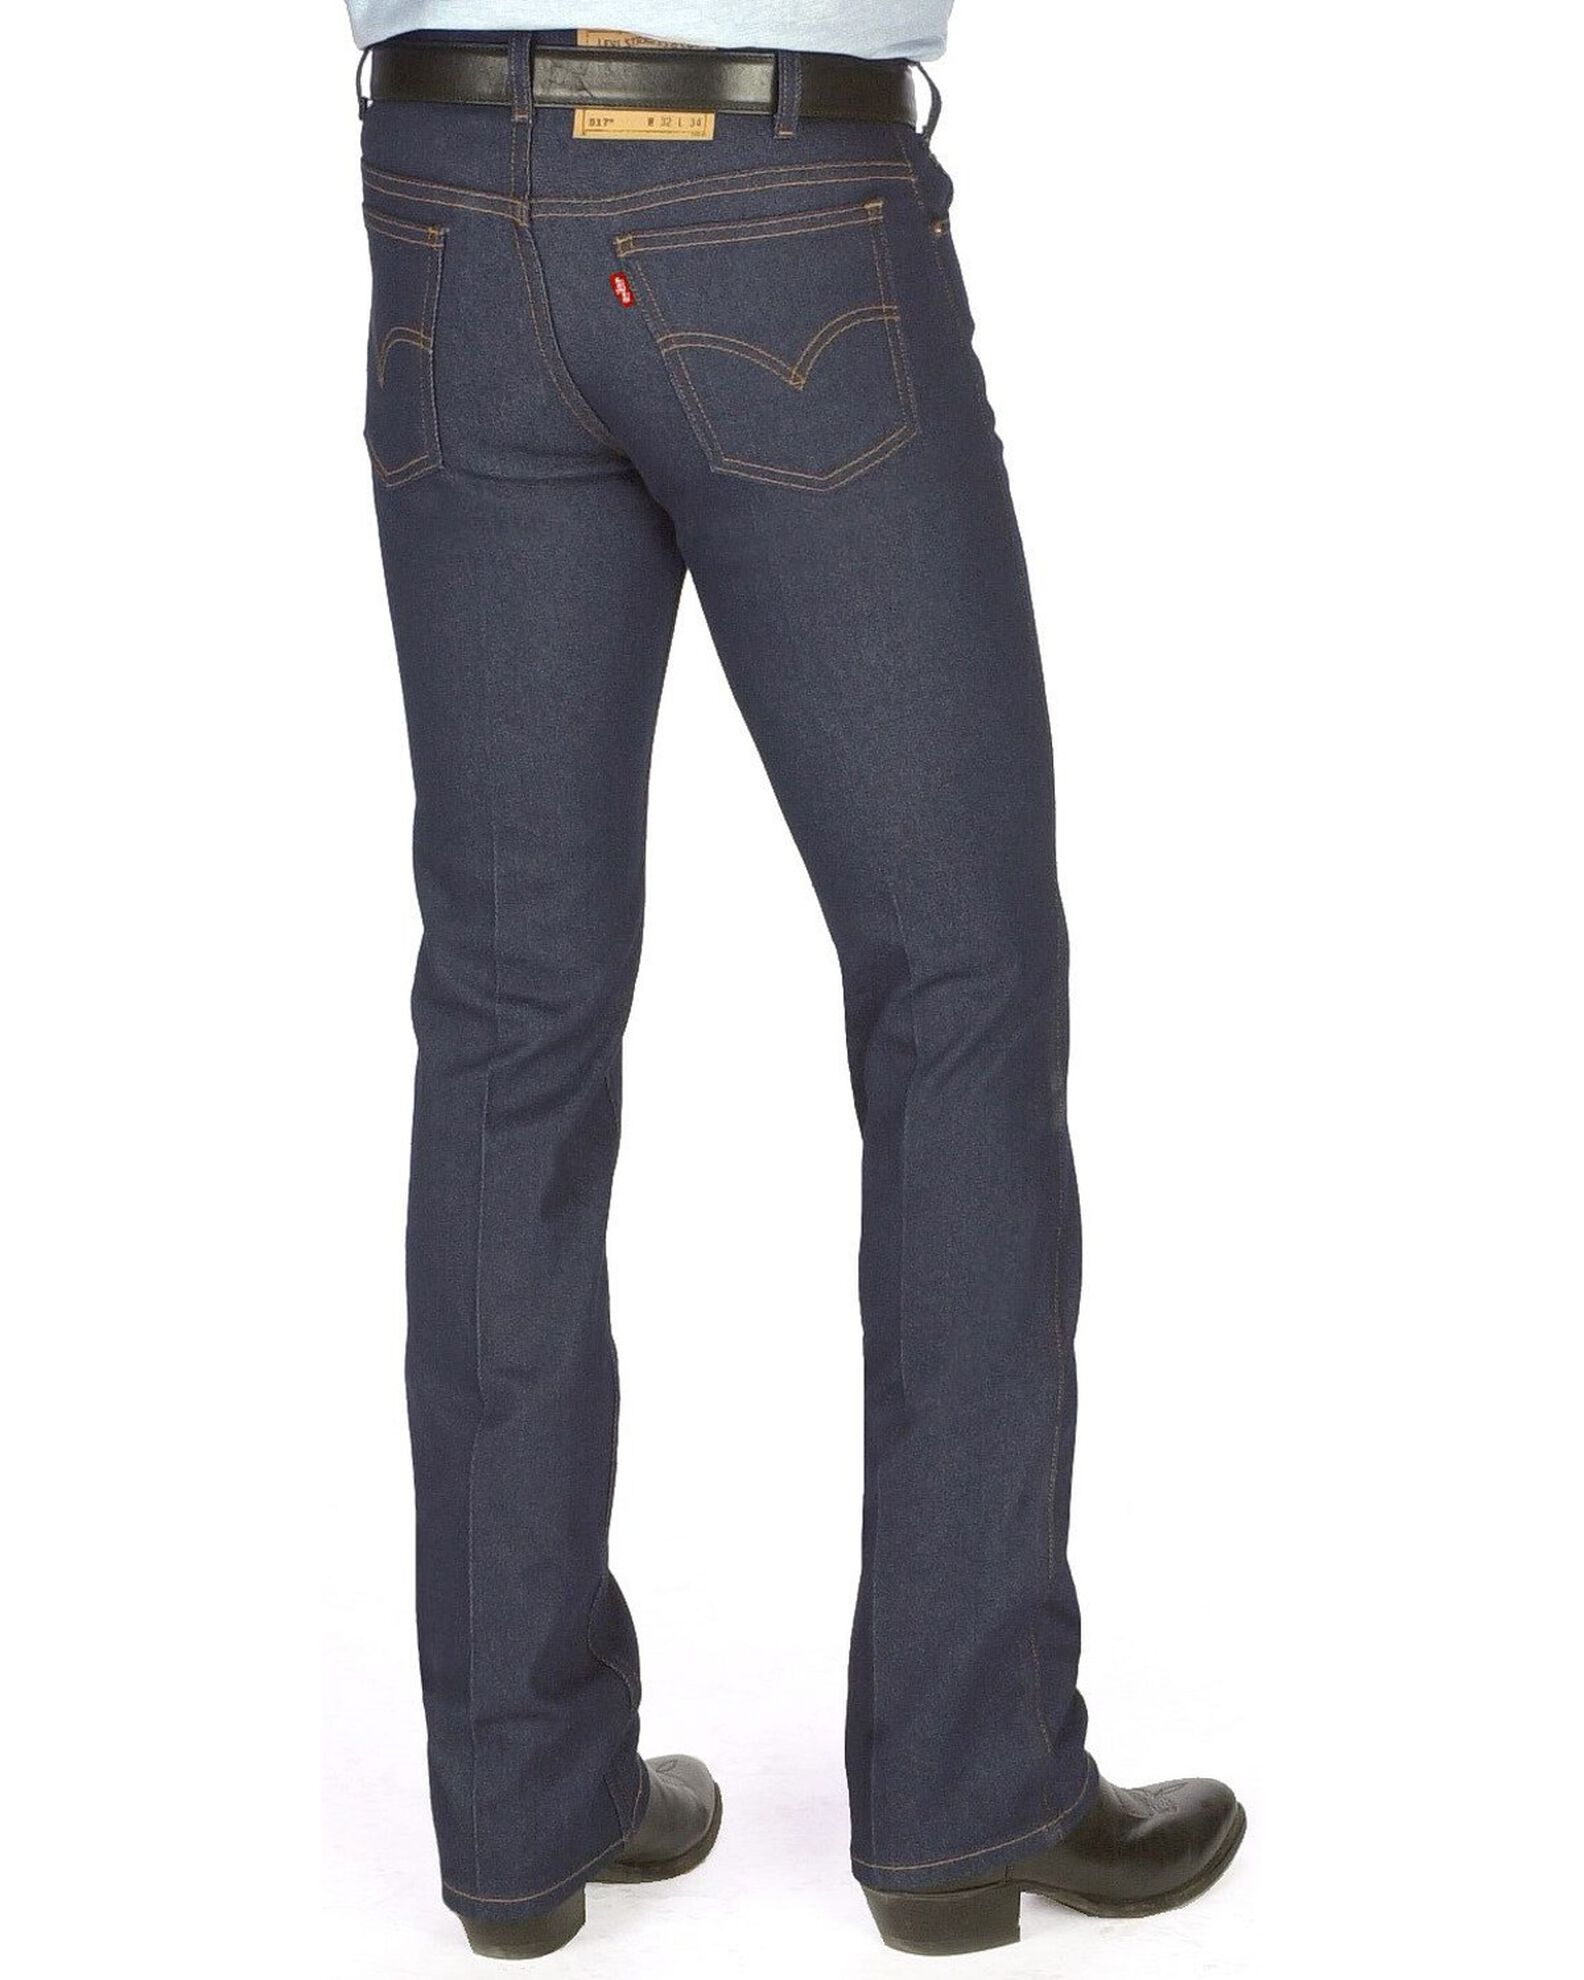 Levi's Men's 517 Indigo Slim Fit Bootcut Jeans - Big and Tall | Boot Barn